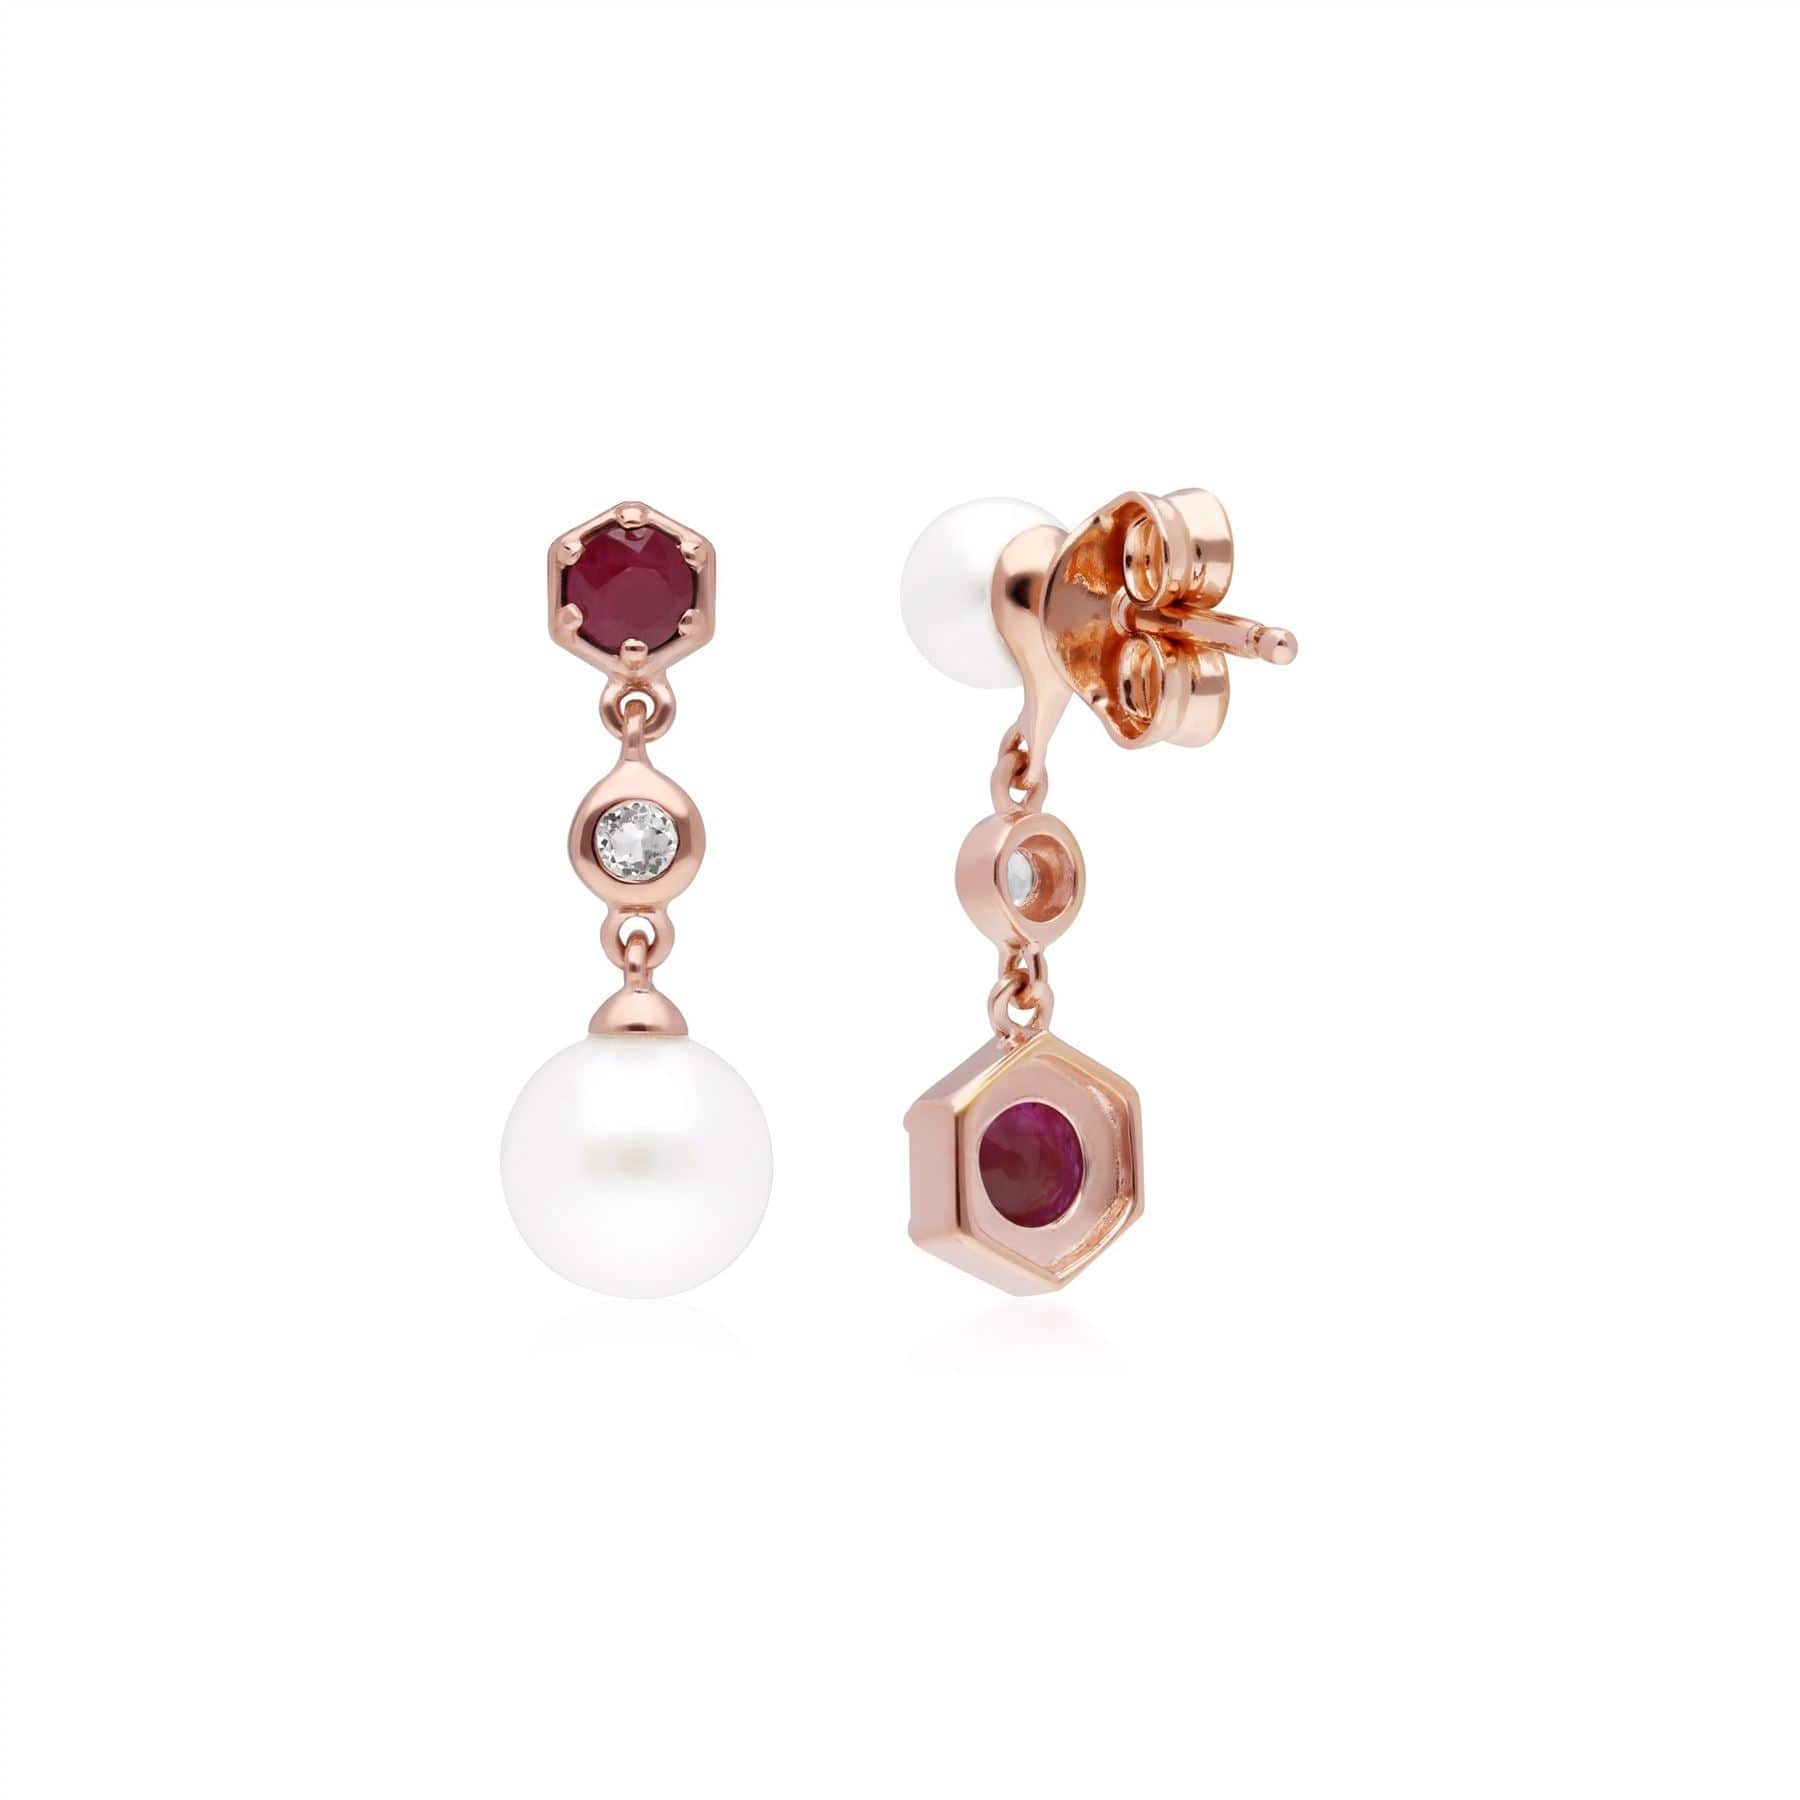 Modern Pearl, Ruby & Topaz Mismatched Drop Earrings in Rose Gold Plated  Silver - Gemondo